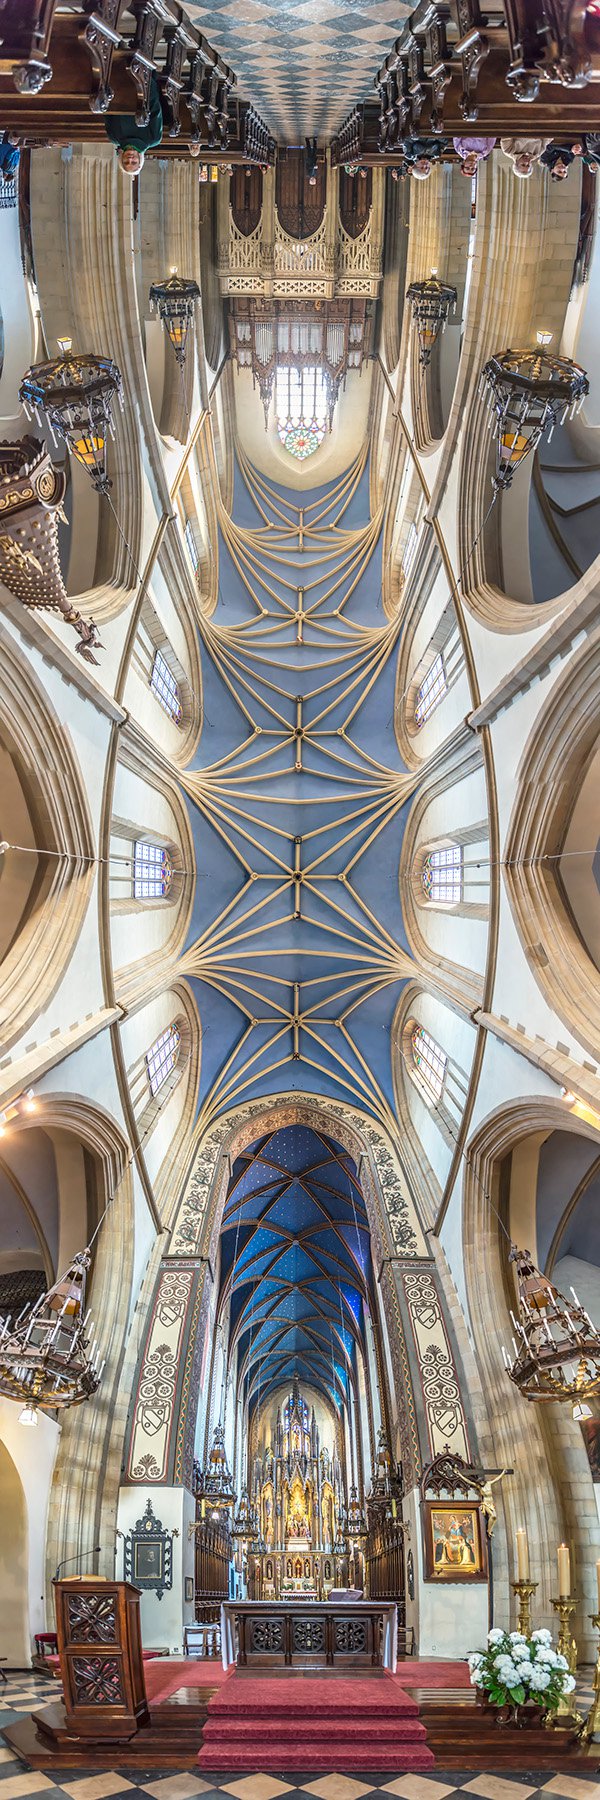 Vertical Churches An Ethereal Architecture Photography Series By Richard Silver 7